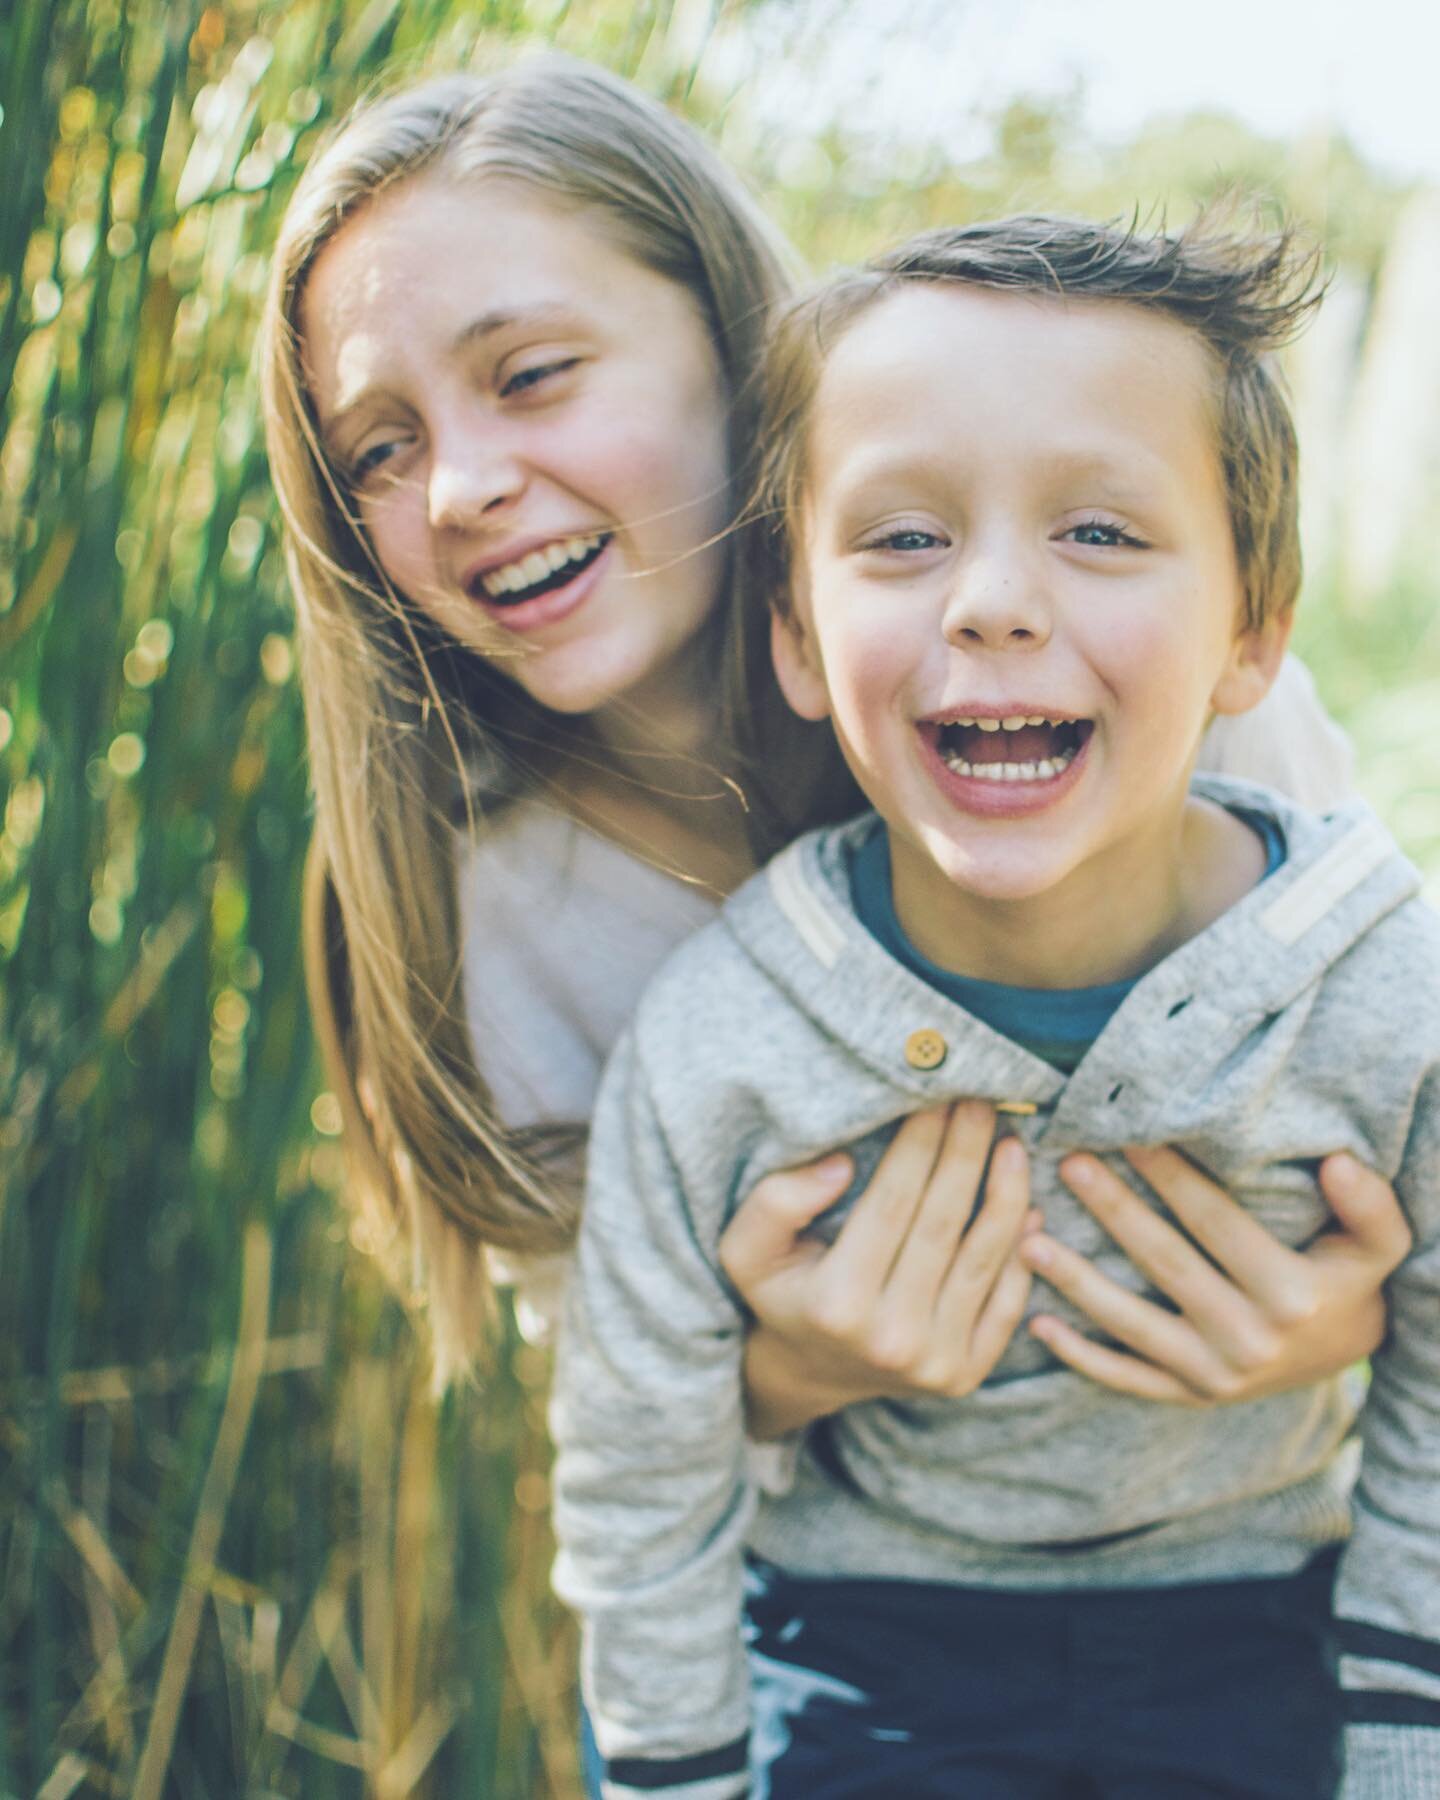 Joy is the emotion of the day. These two are the happiest together. #siblings